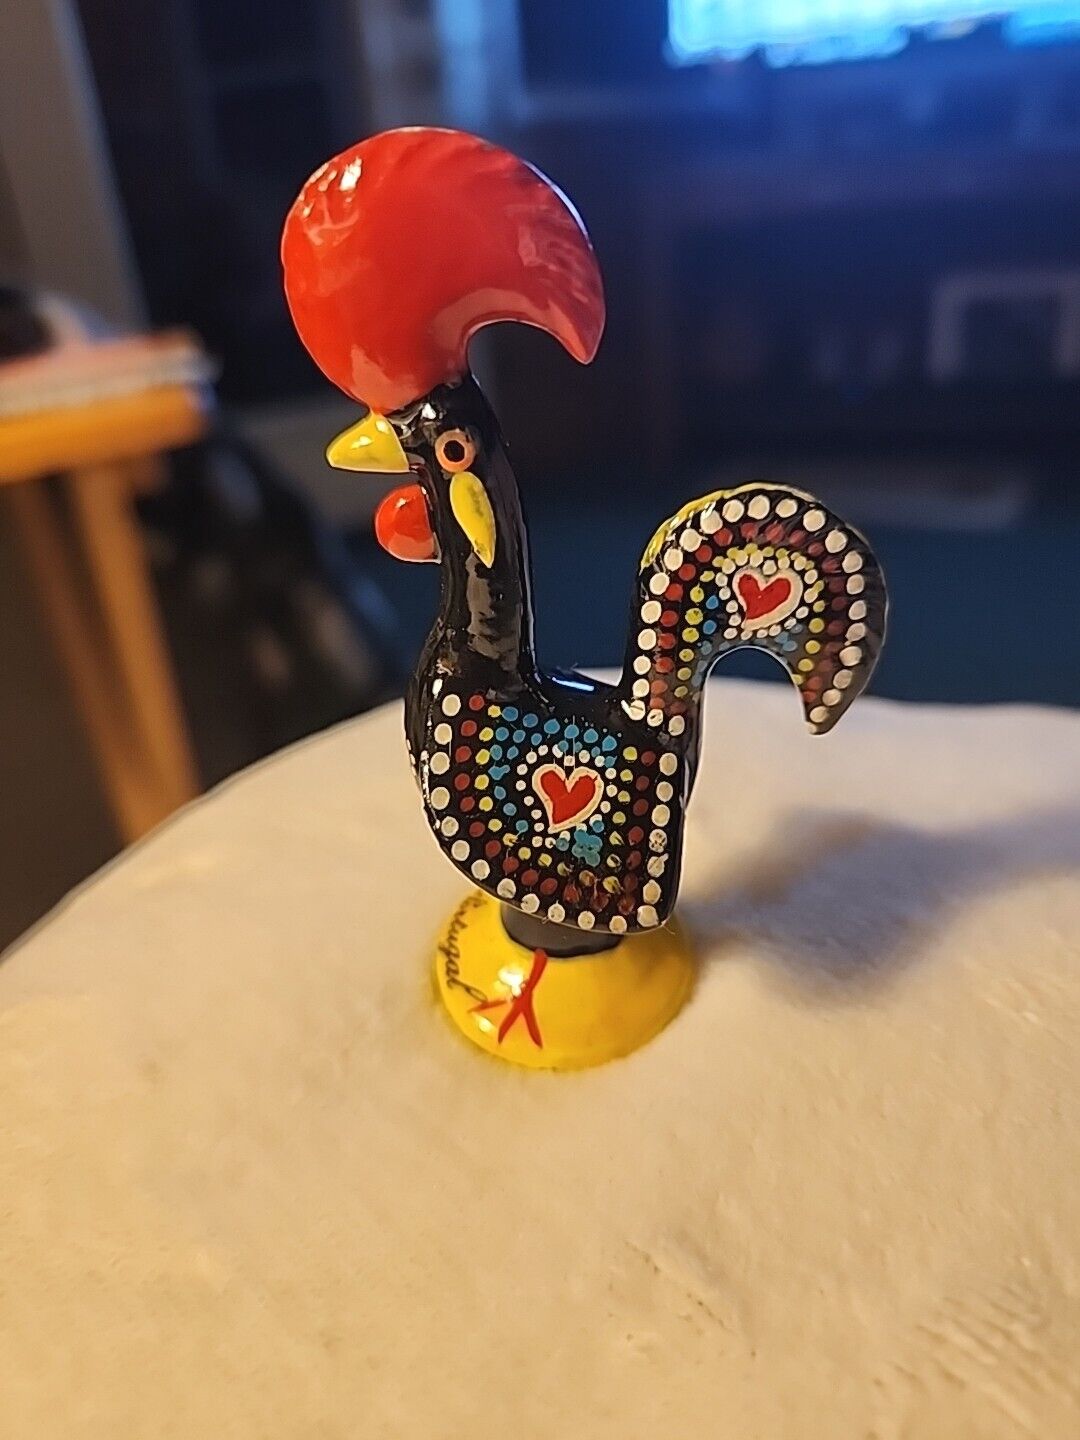 Portuguese Barcelos Rooster Figurine Good Luck Hand Pain Folk Art Portugal Small